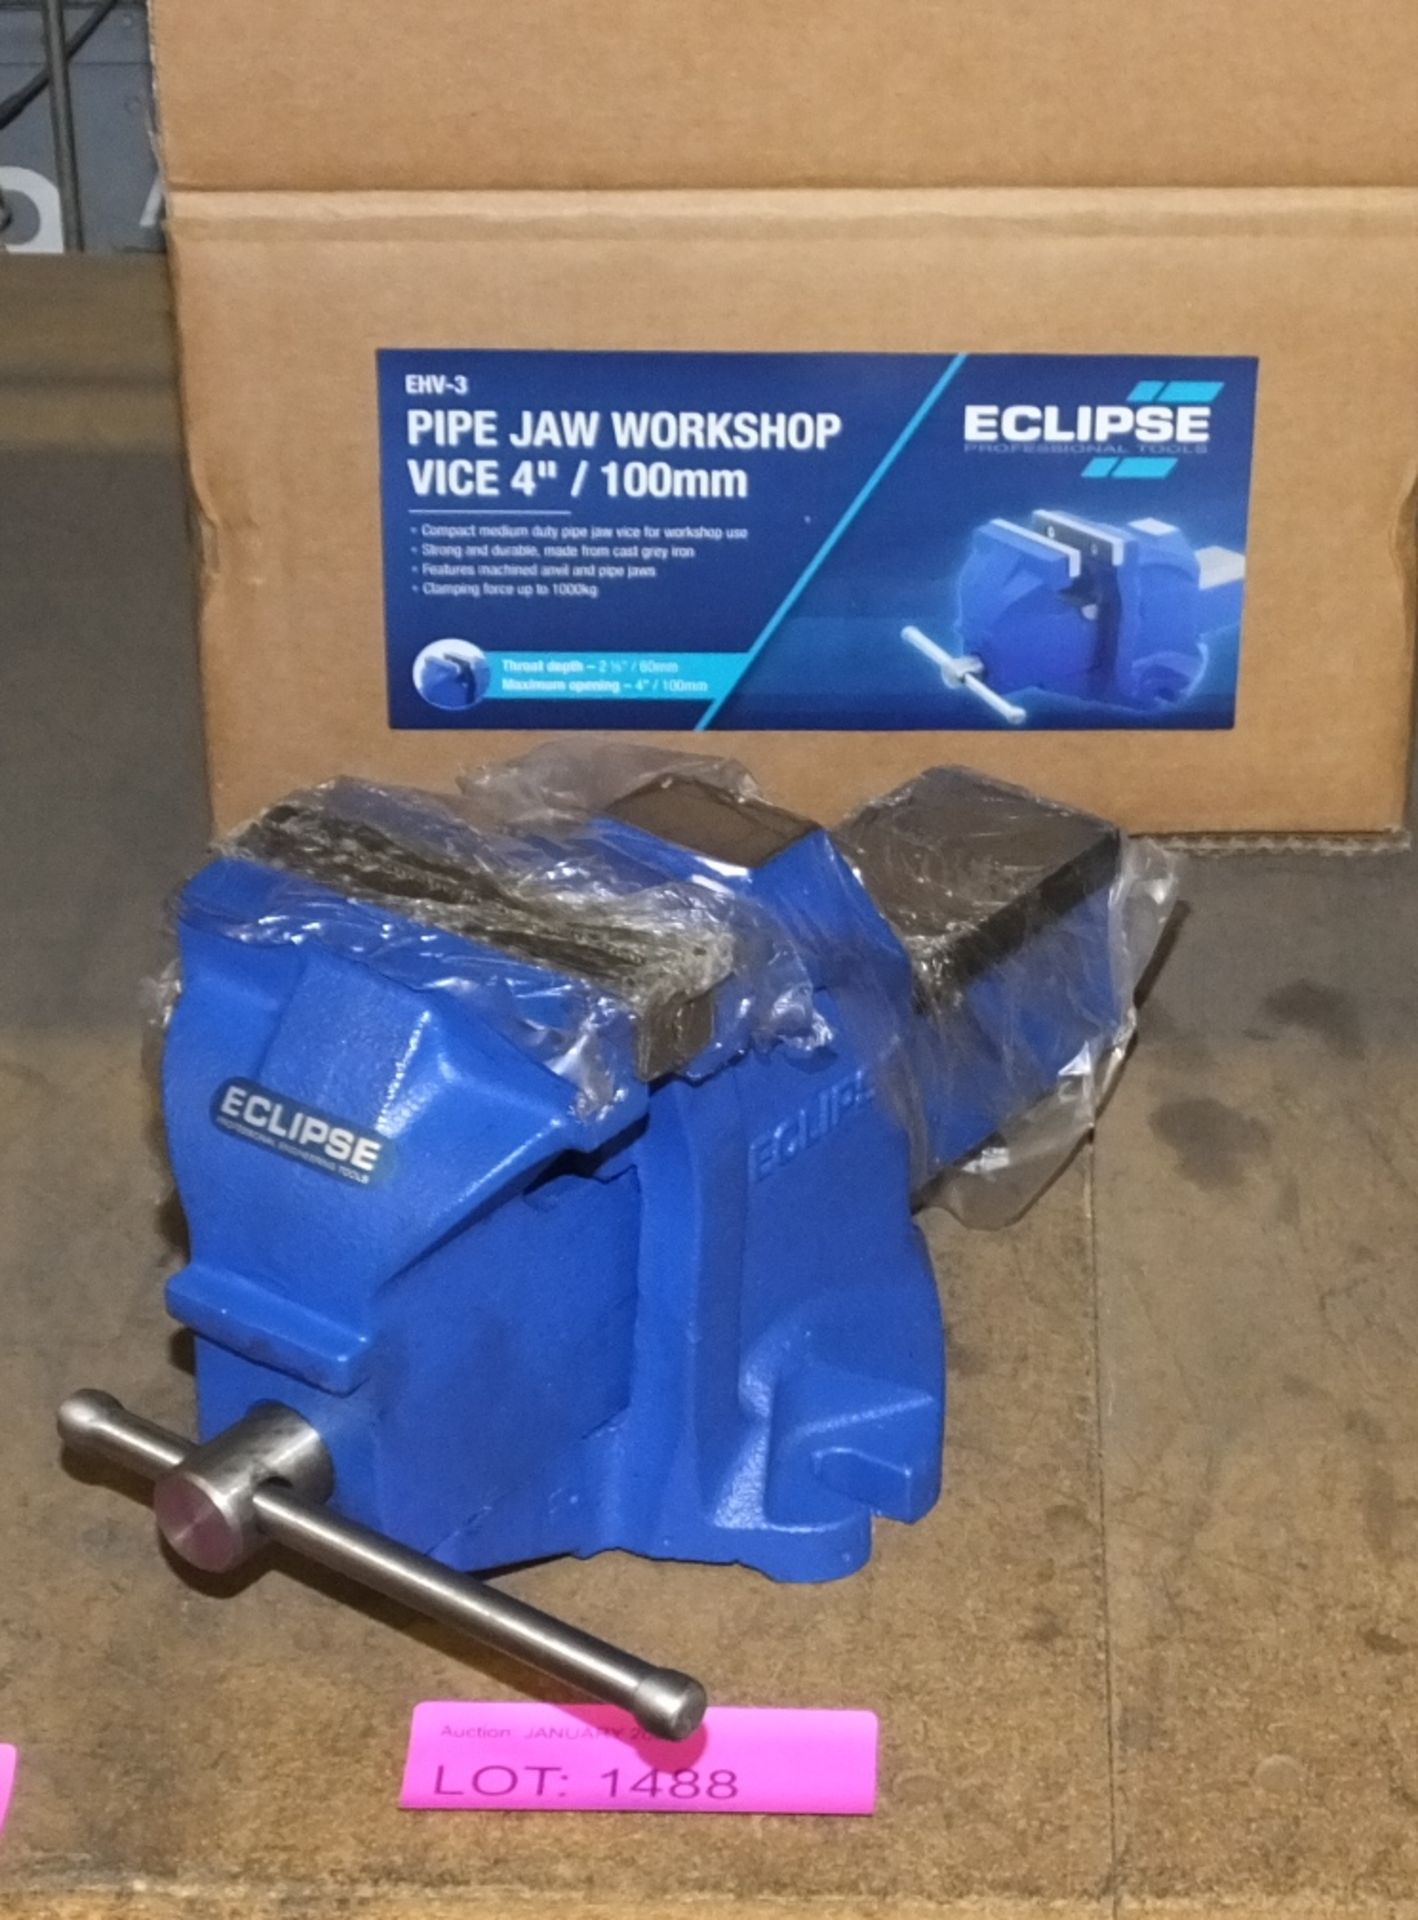 Eclips EHW-3 Pipe Jaw Workshop Vice - 4" / 100mm